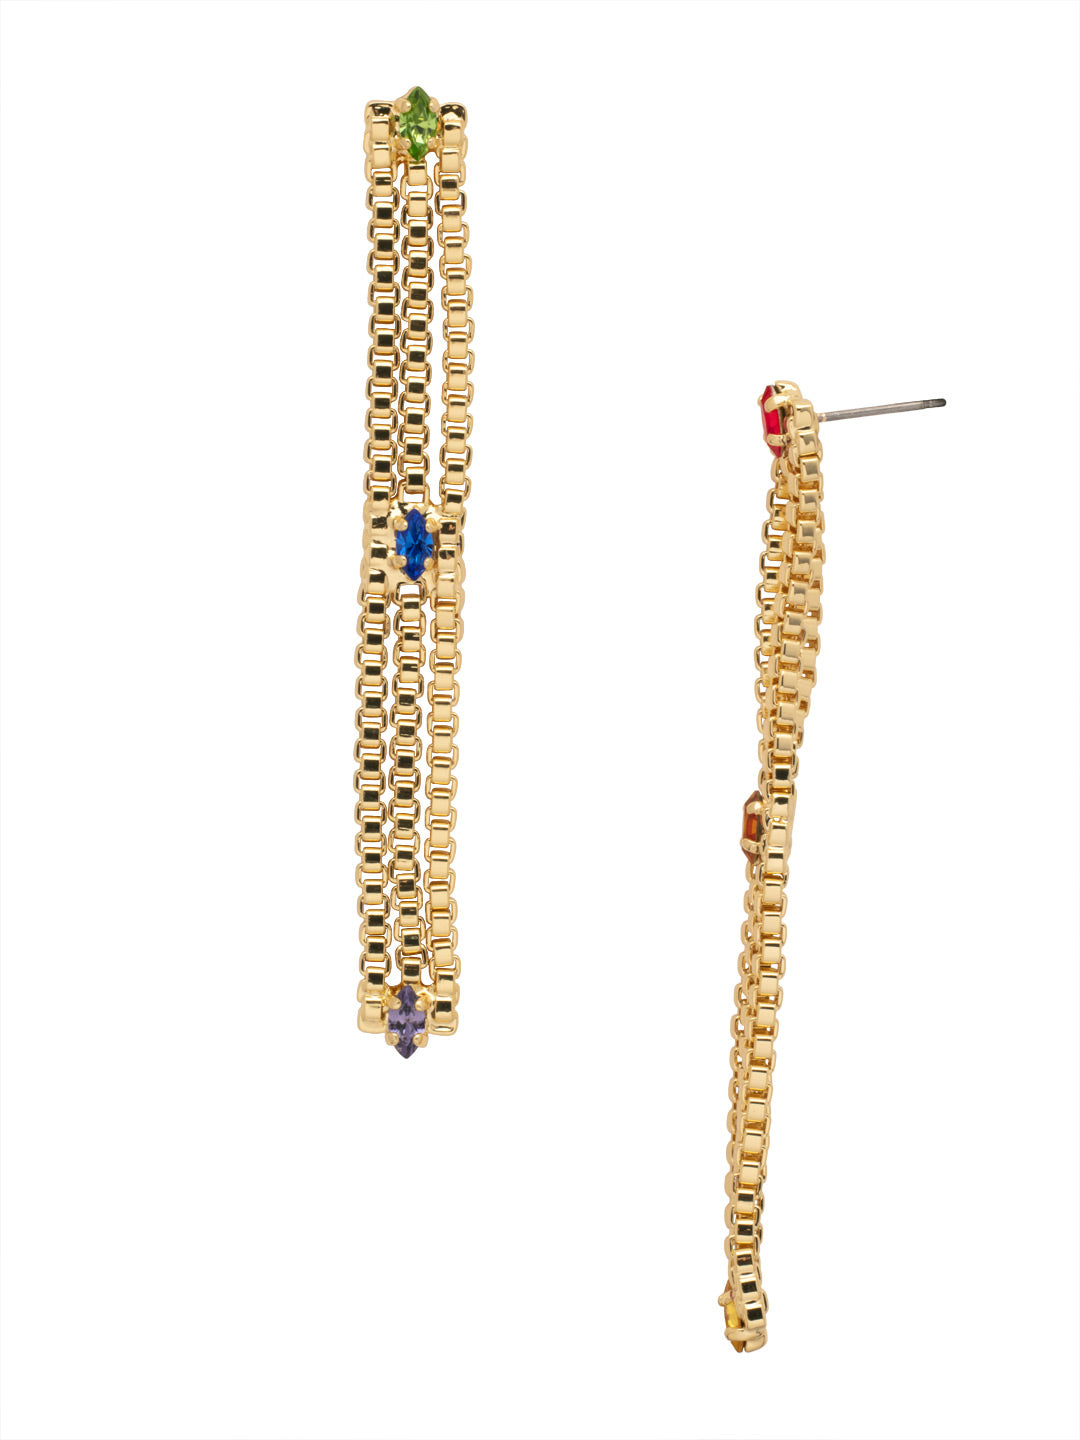 Truly Dangle Earrings - 8EA8BGPRI - <p>The Truly Dangle Earrings are TRULY stunning. Three box chains embellished with navette crystals dangle from a post. From Sorrelli's Prism collection in our Bright Gold-tone finish.</p>